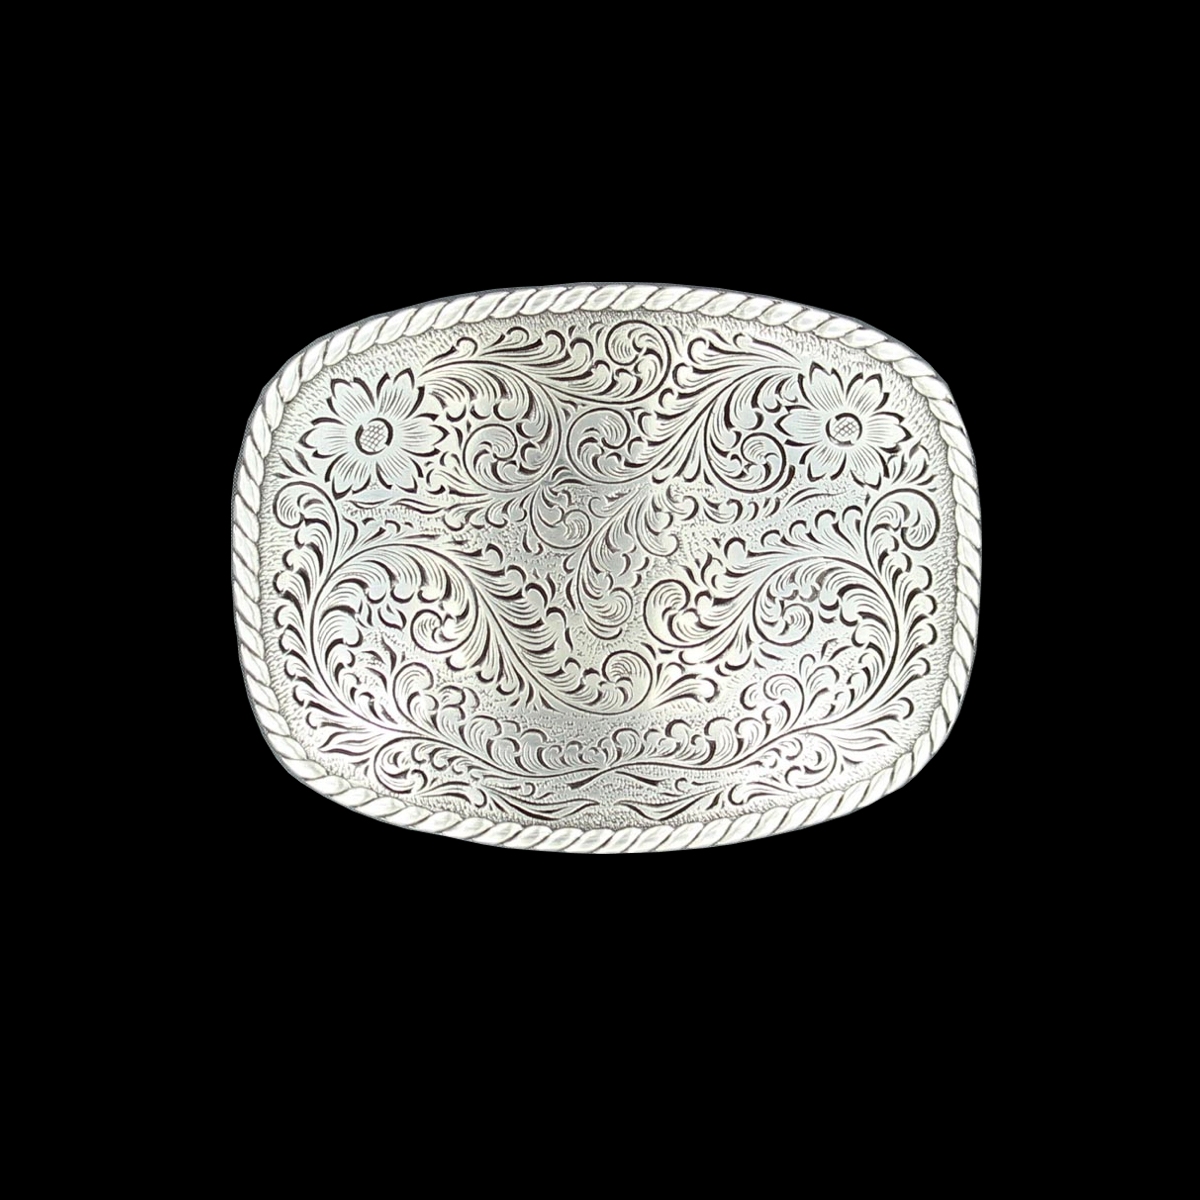 MF-37234 Belt Buckle Silver w/Floral Design and Rope Edge